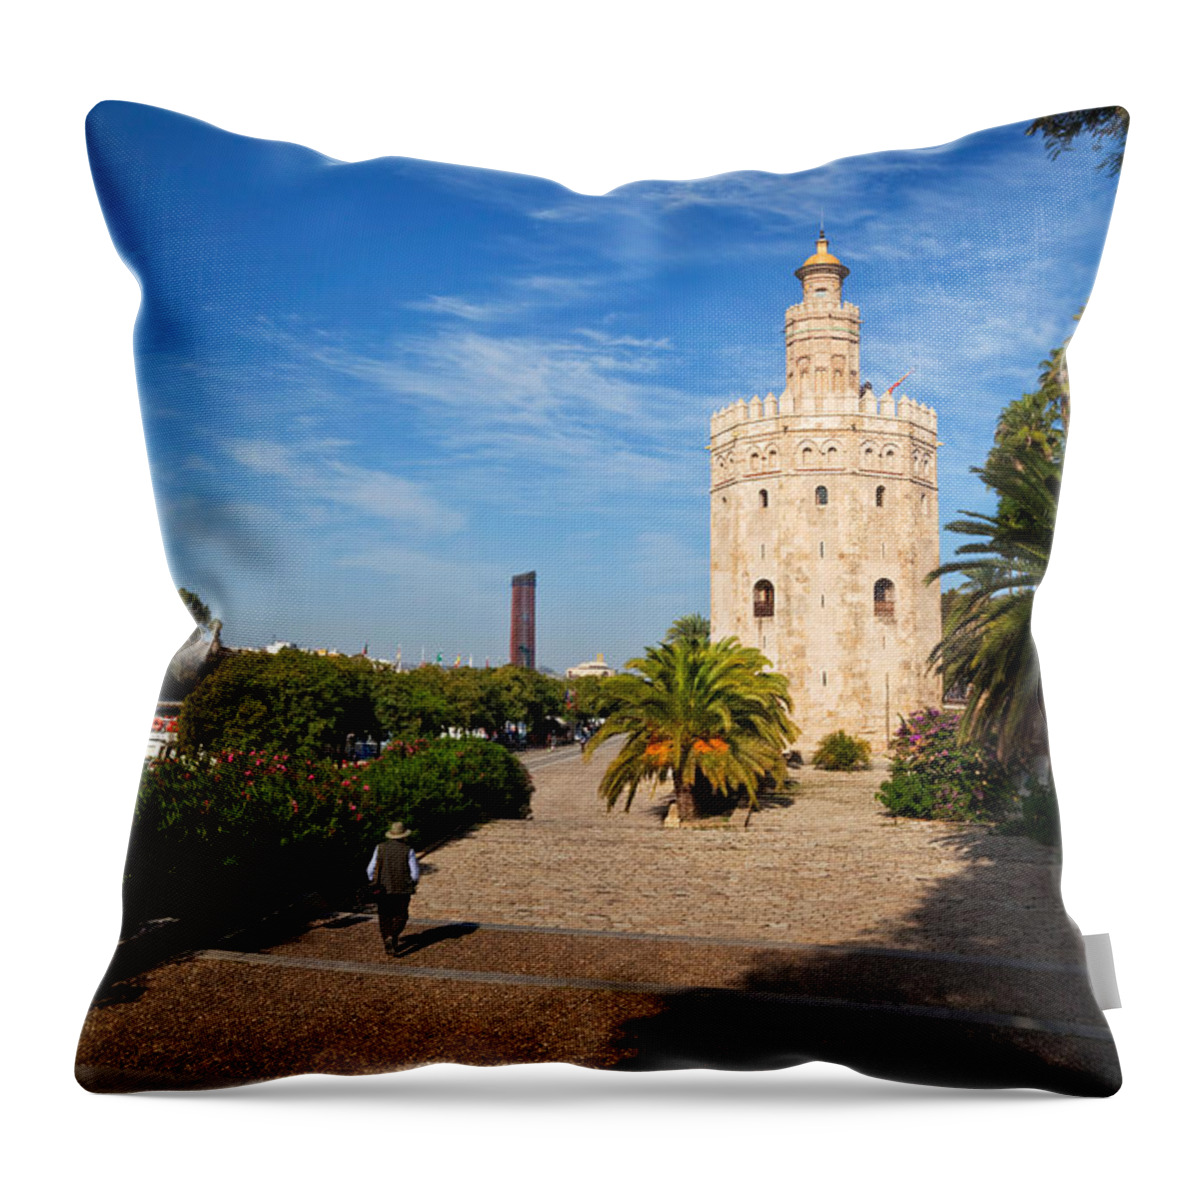 Photography Throw Pillow featuring the photograph The Torre Del Oro, Gold Tower, Military by Panoramic Images